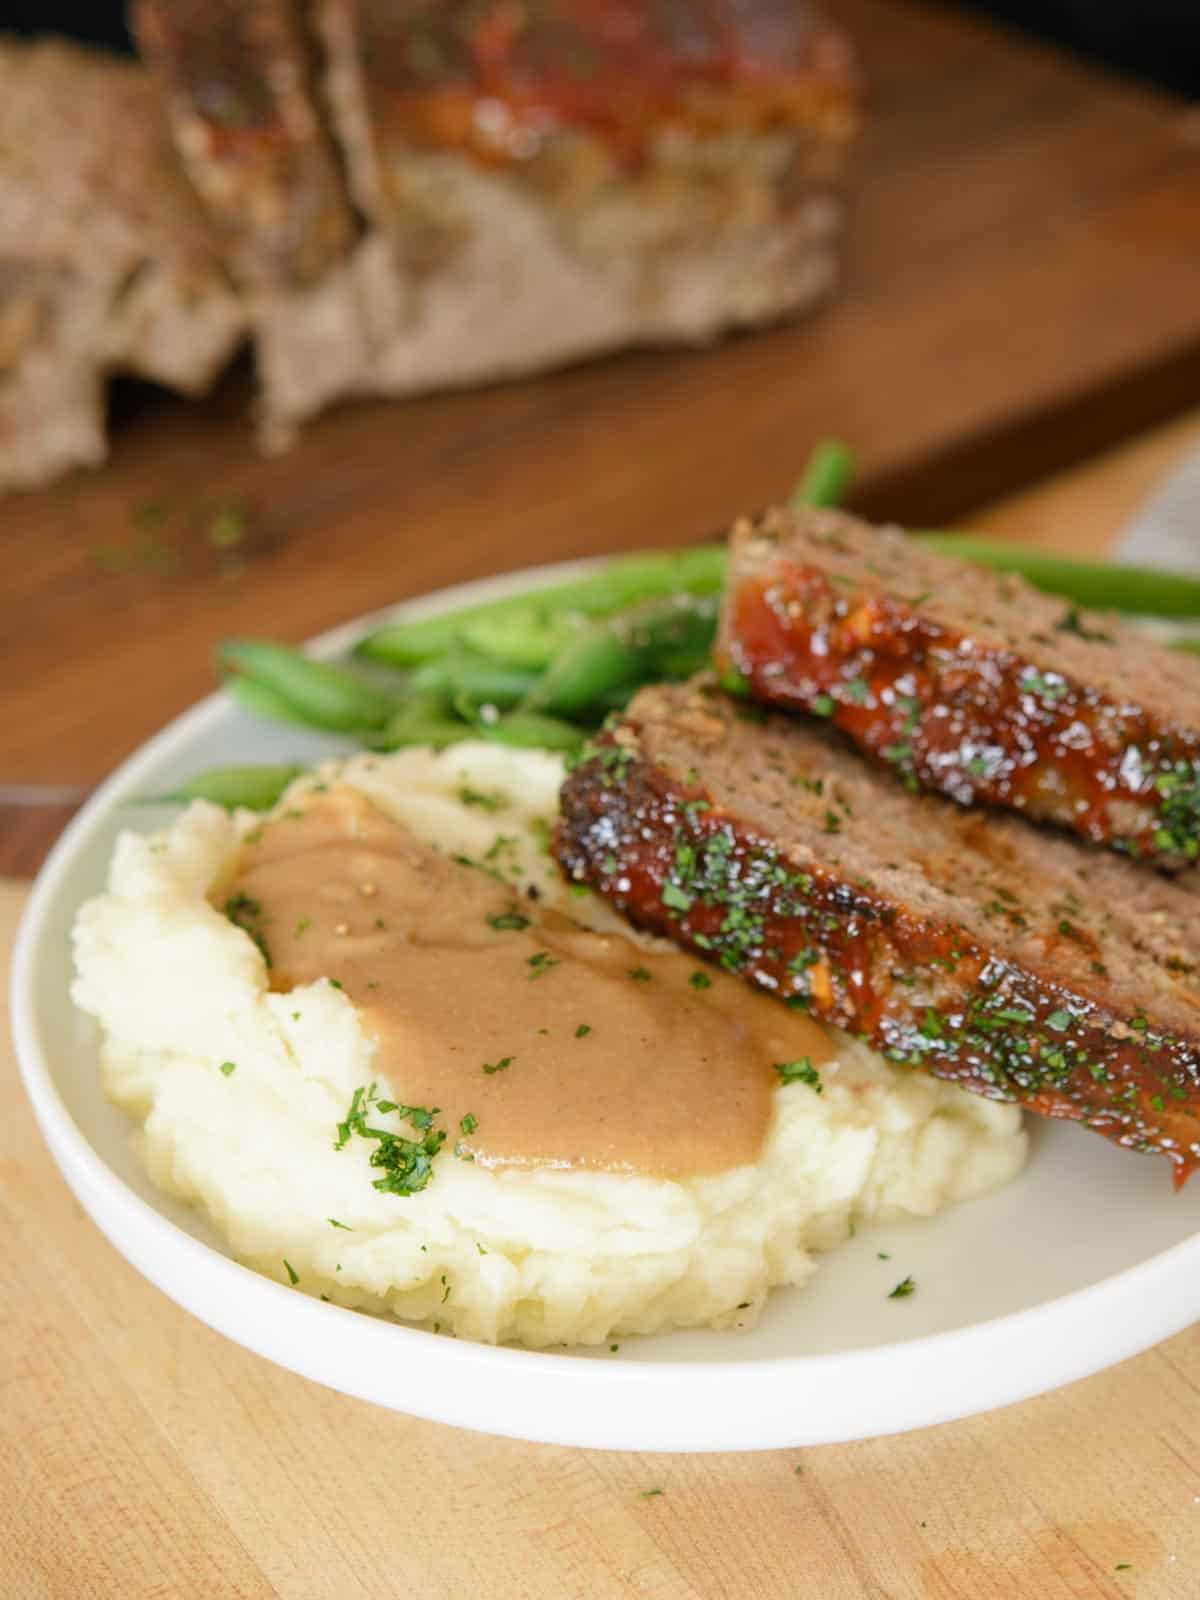 Meatloaf recipe served with mashed potatoes topped with gravy and blanched green beans